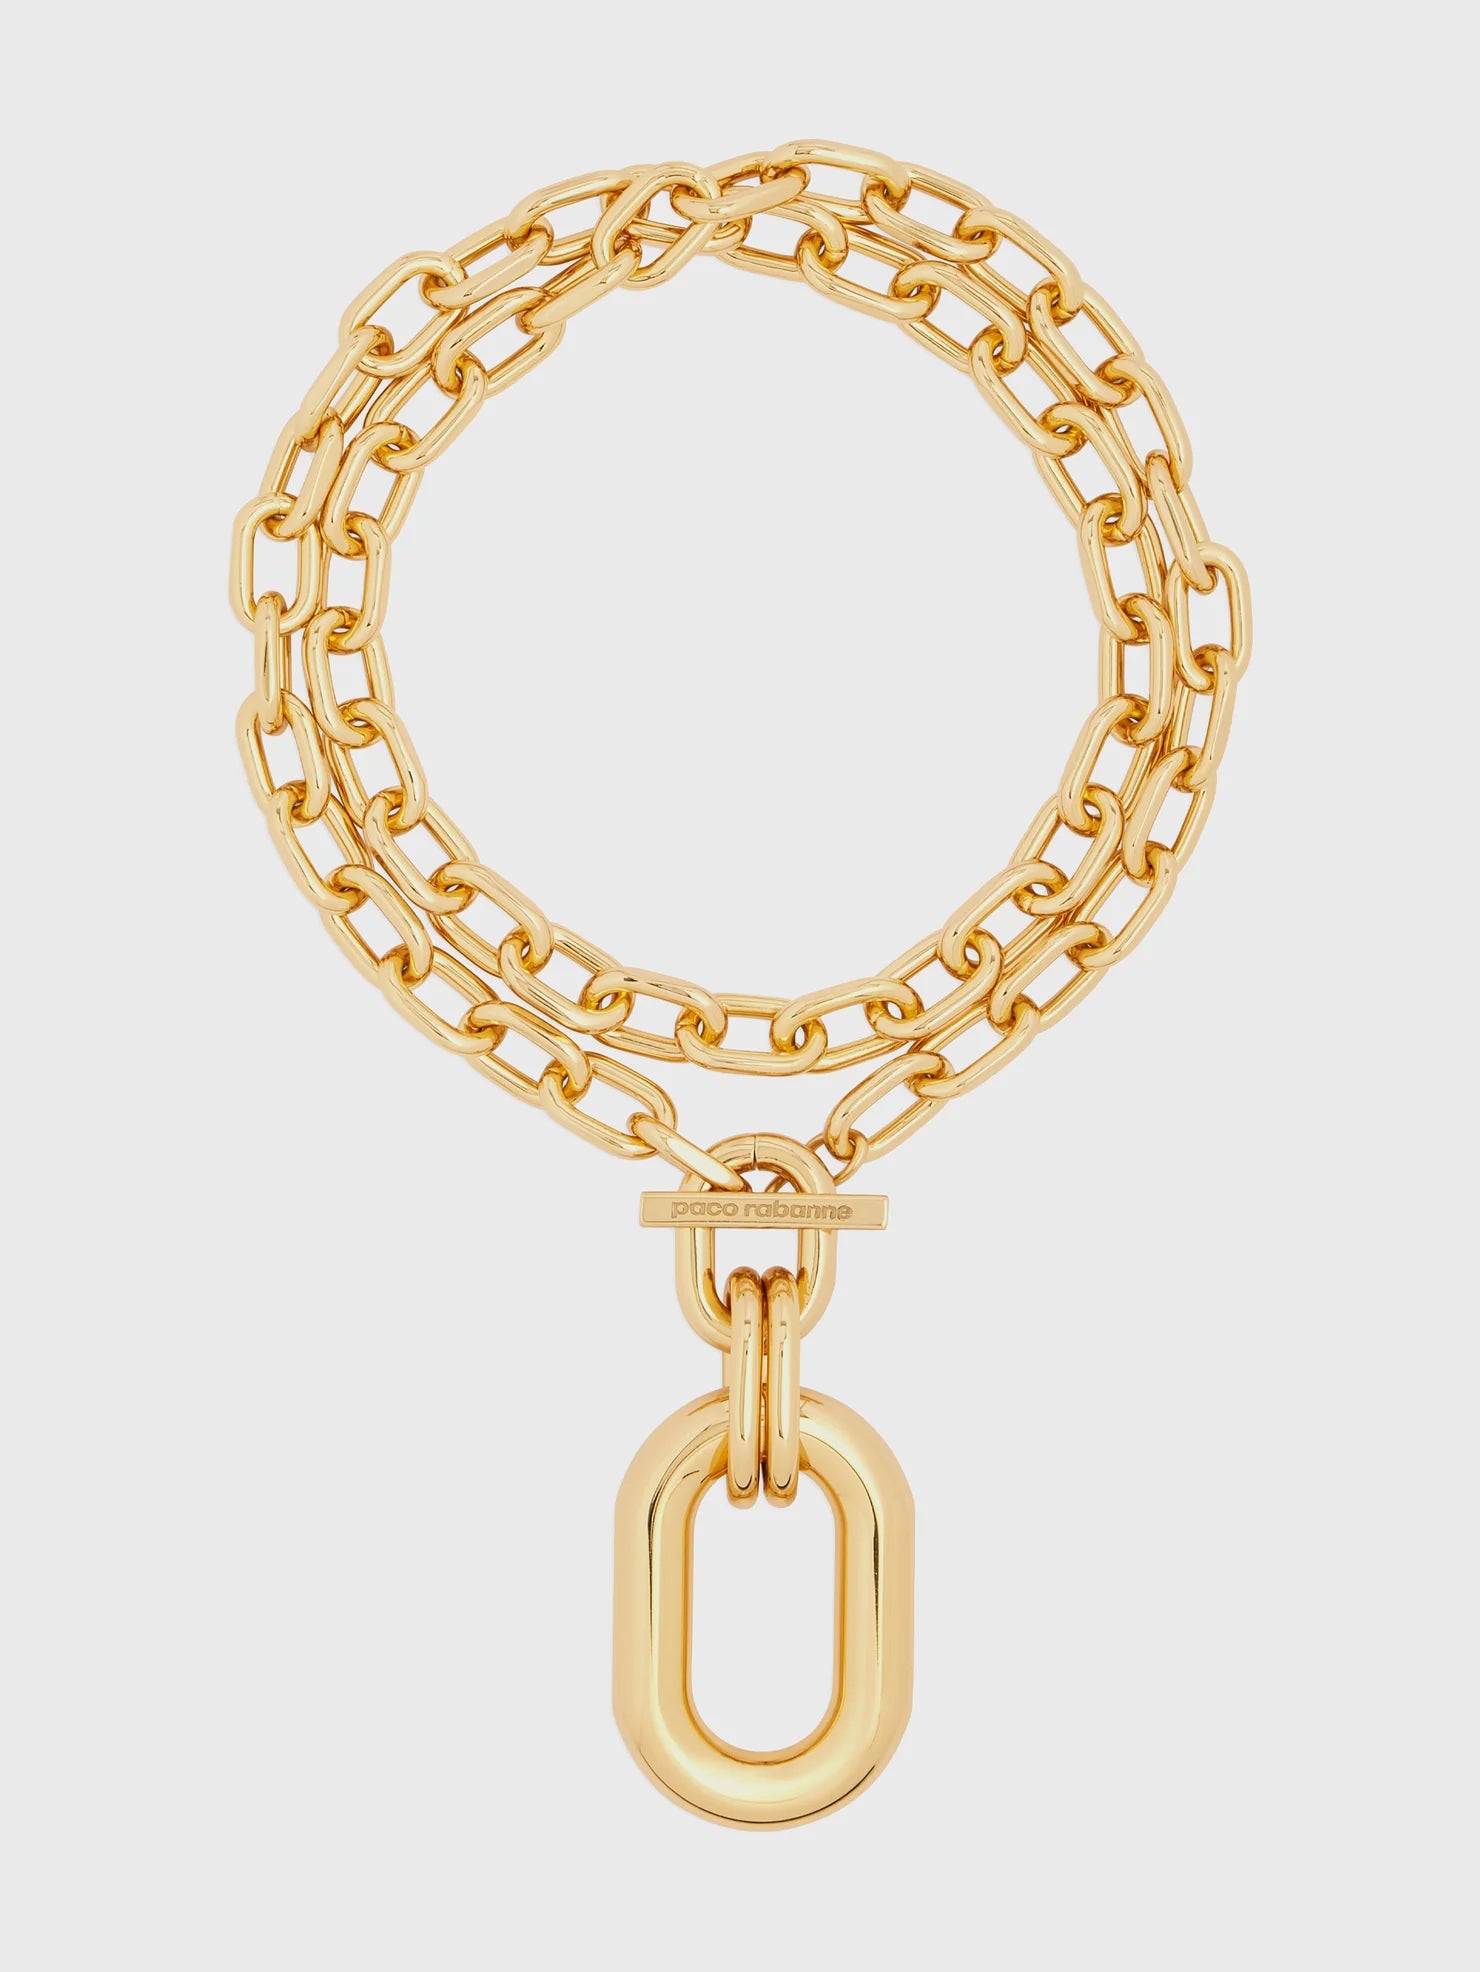 Gold double chain XL Link necklace with Pendant